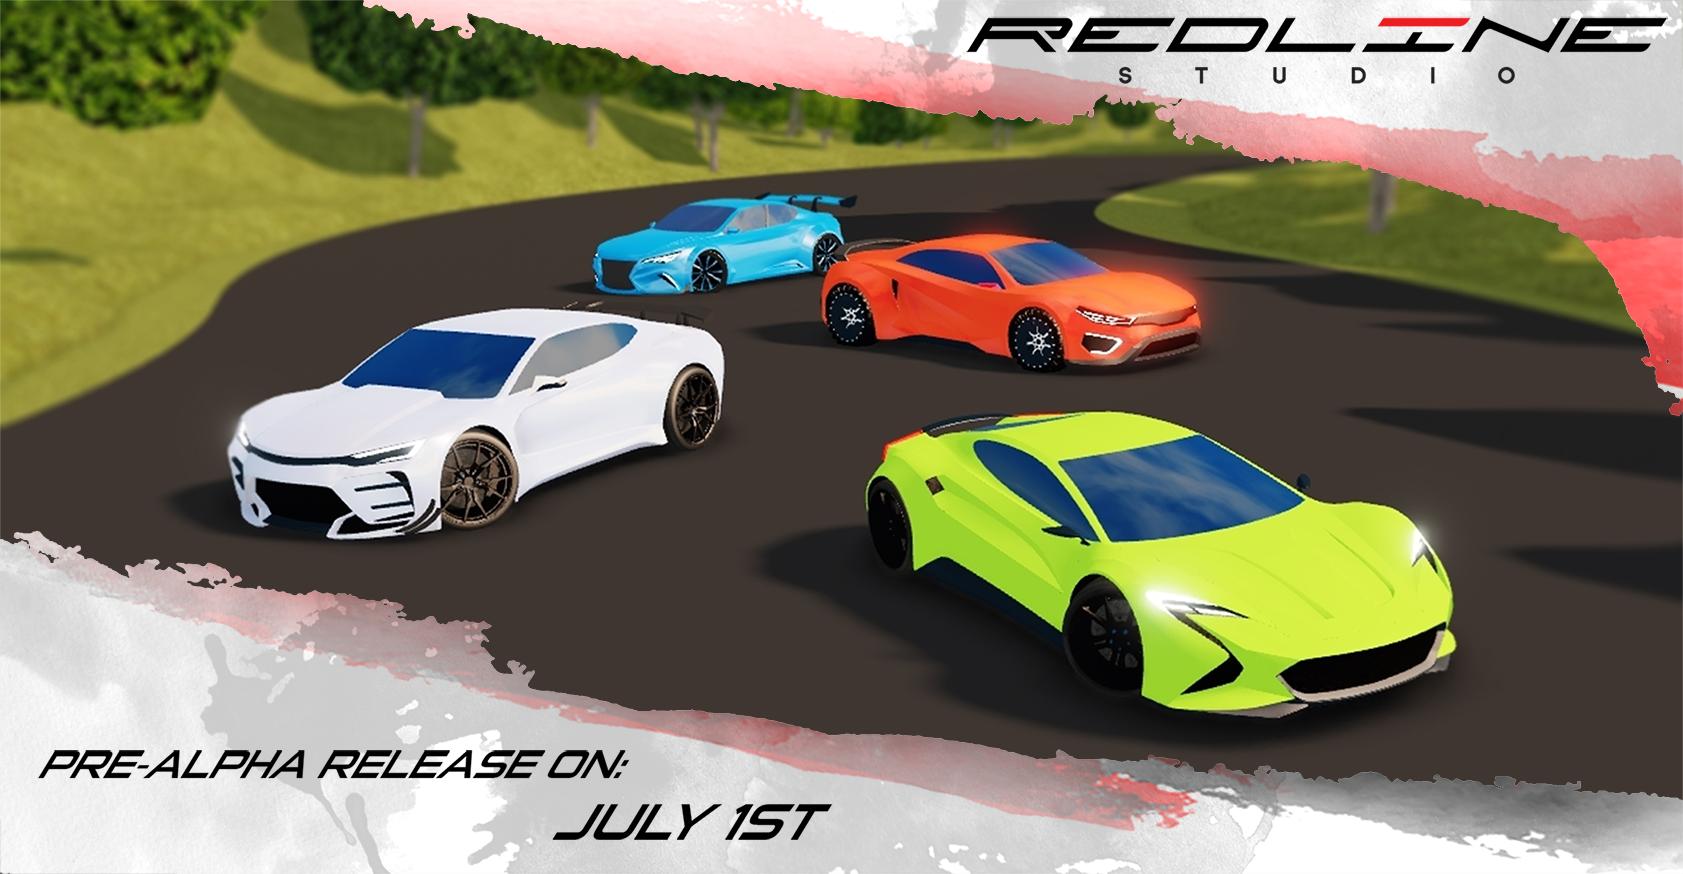 Orlando777 On Twitter Who S Ready Glad To Announce That Rev Pre Alpha Will Be Released On July 1st Be Sure To Join Our Discord Server To Leave Feedback Of What You D Like - roblox car rev